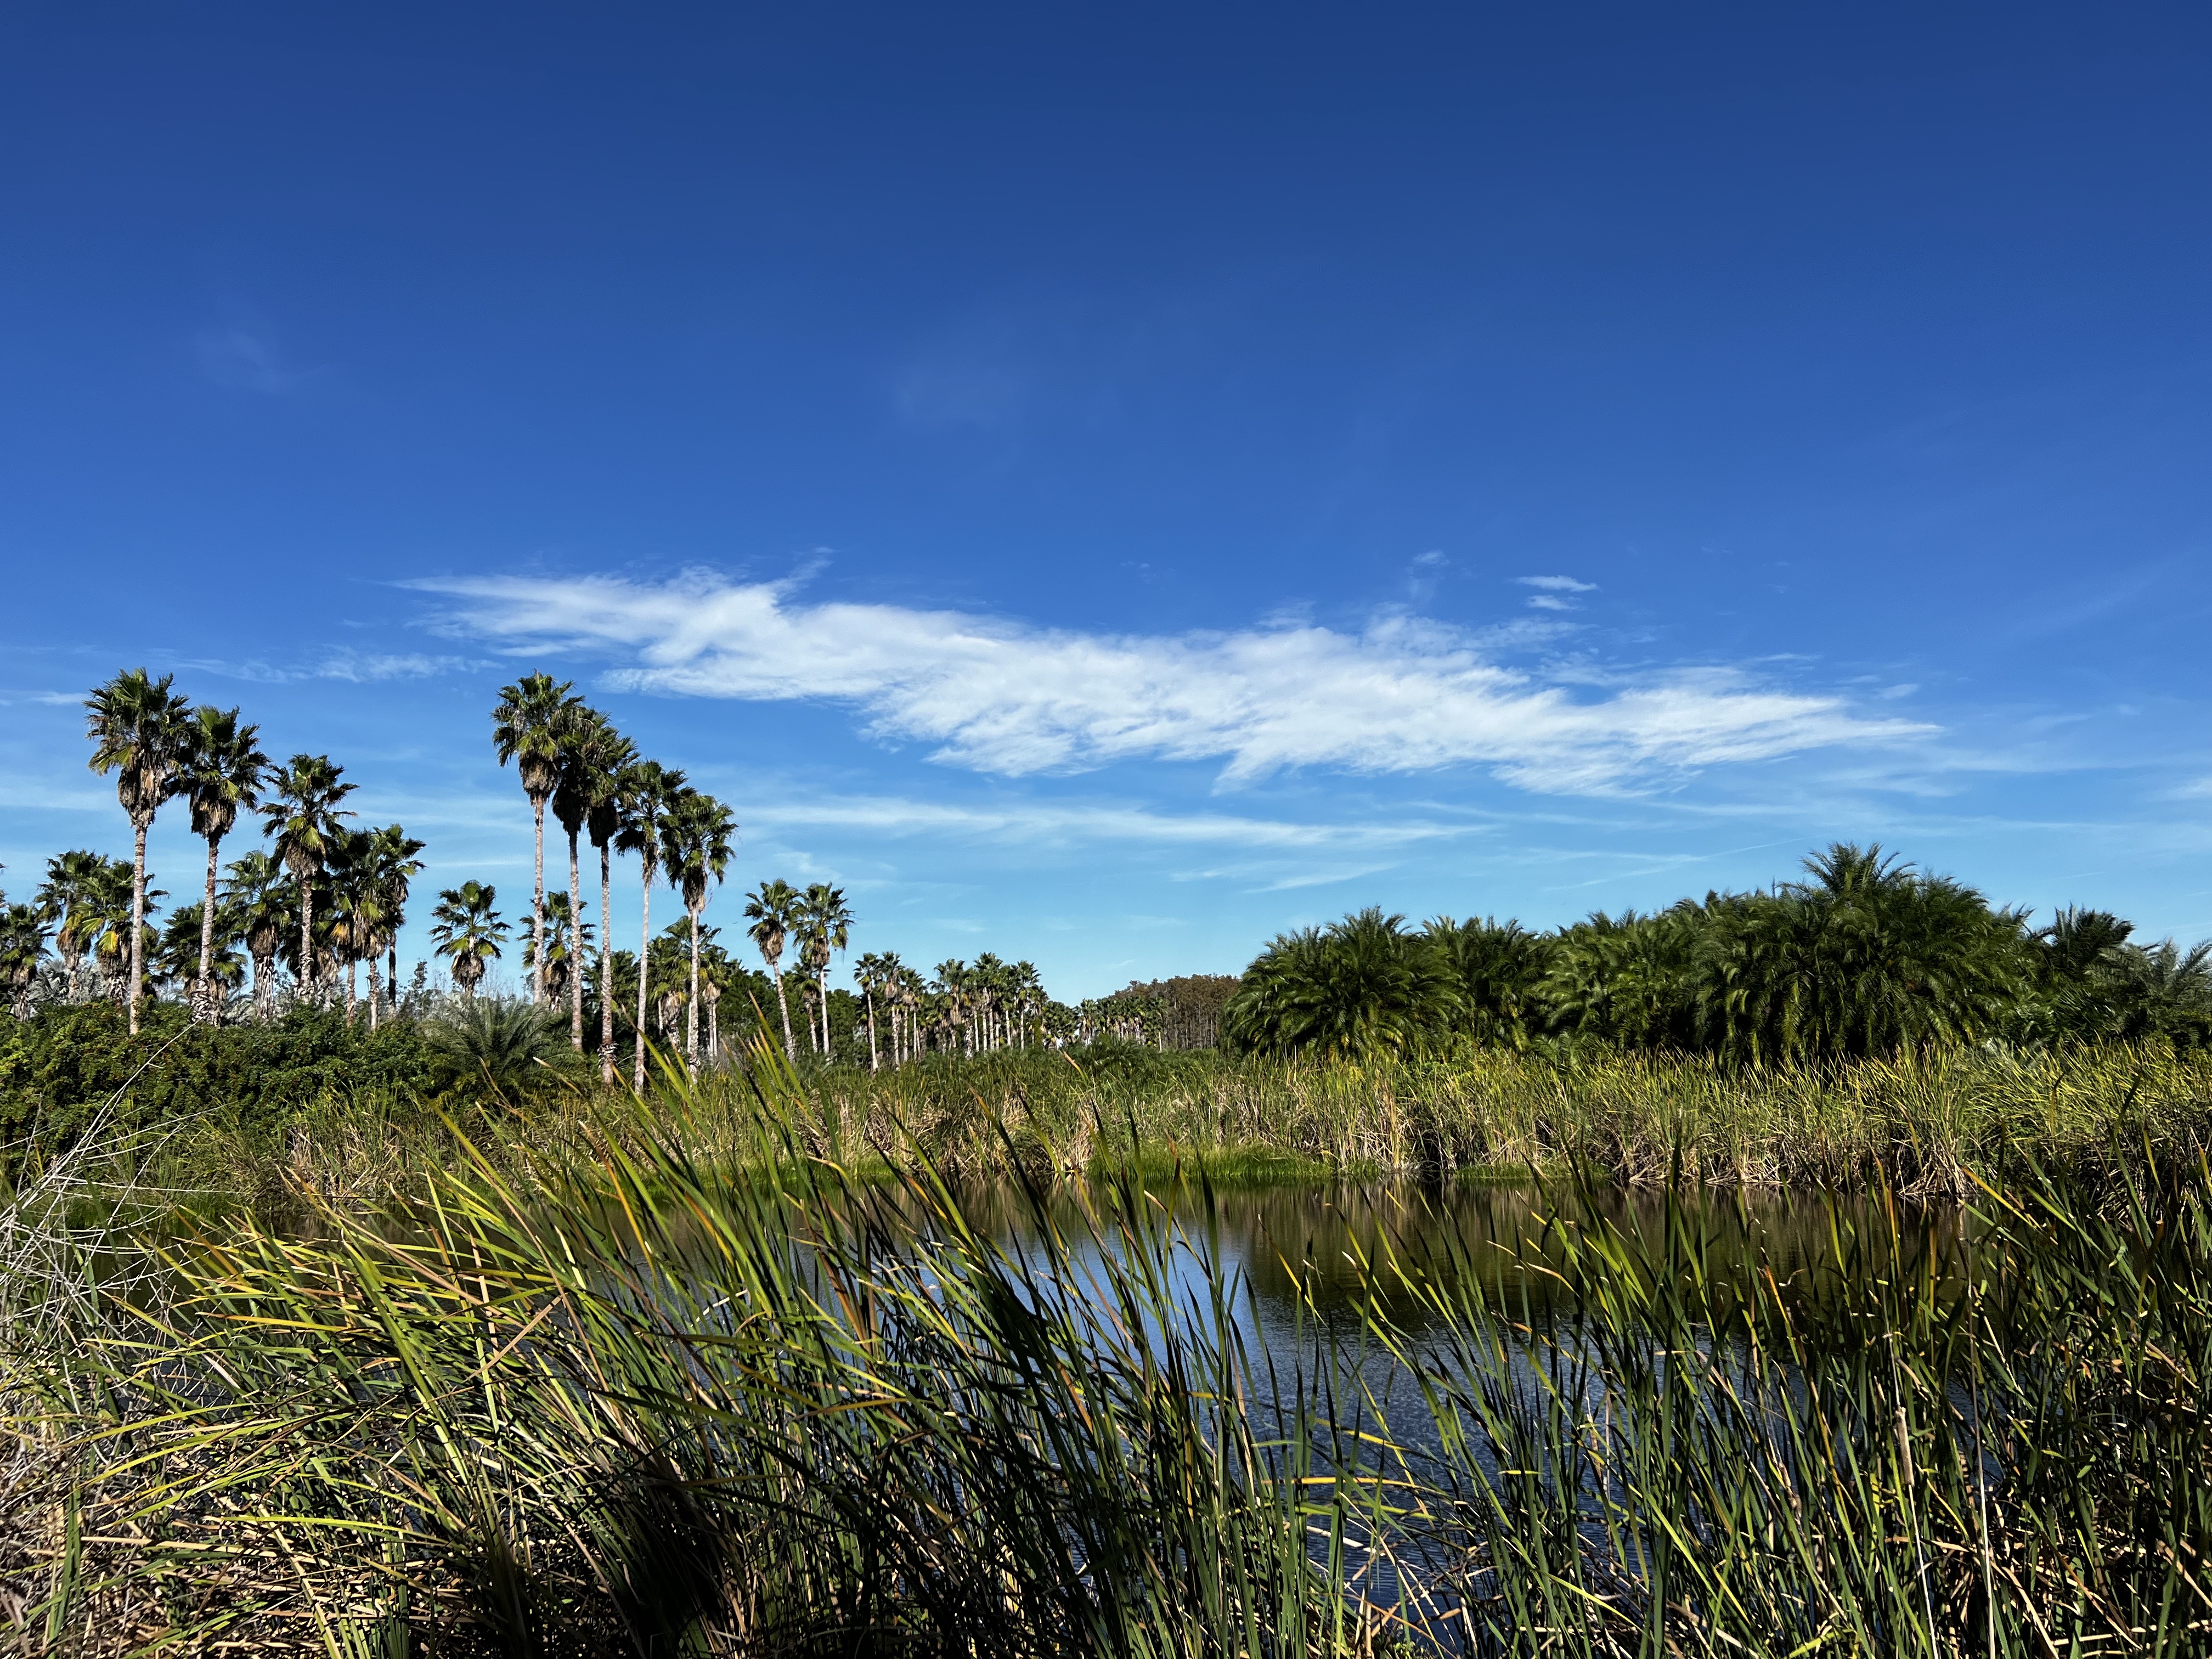 A small pond is surrounded by tall grasses. Rows of palm trees grow in the background, stretching to the horizon.